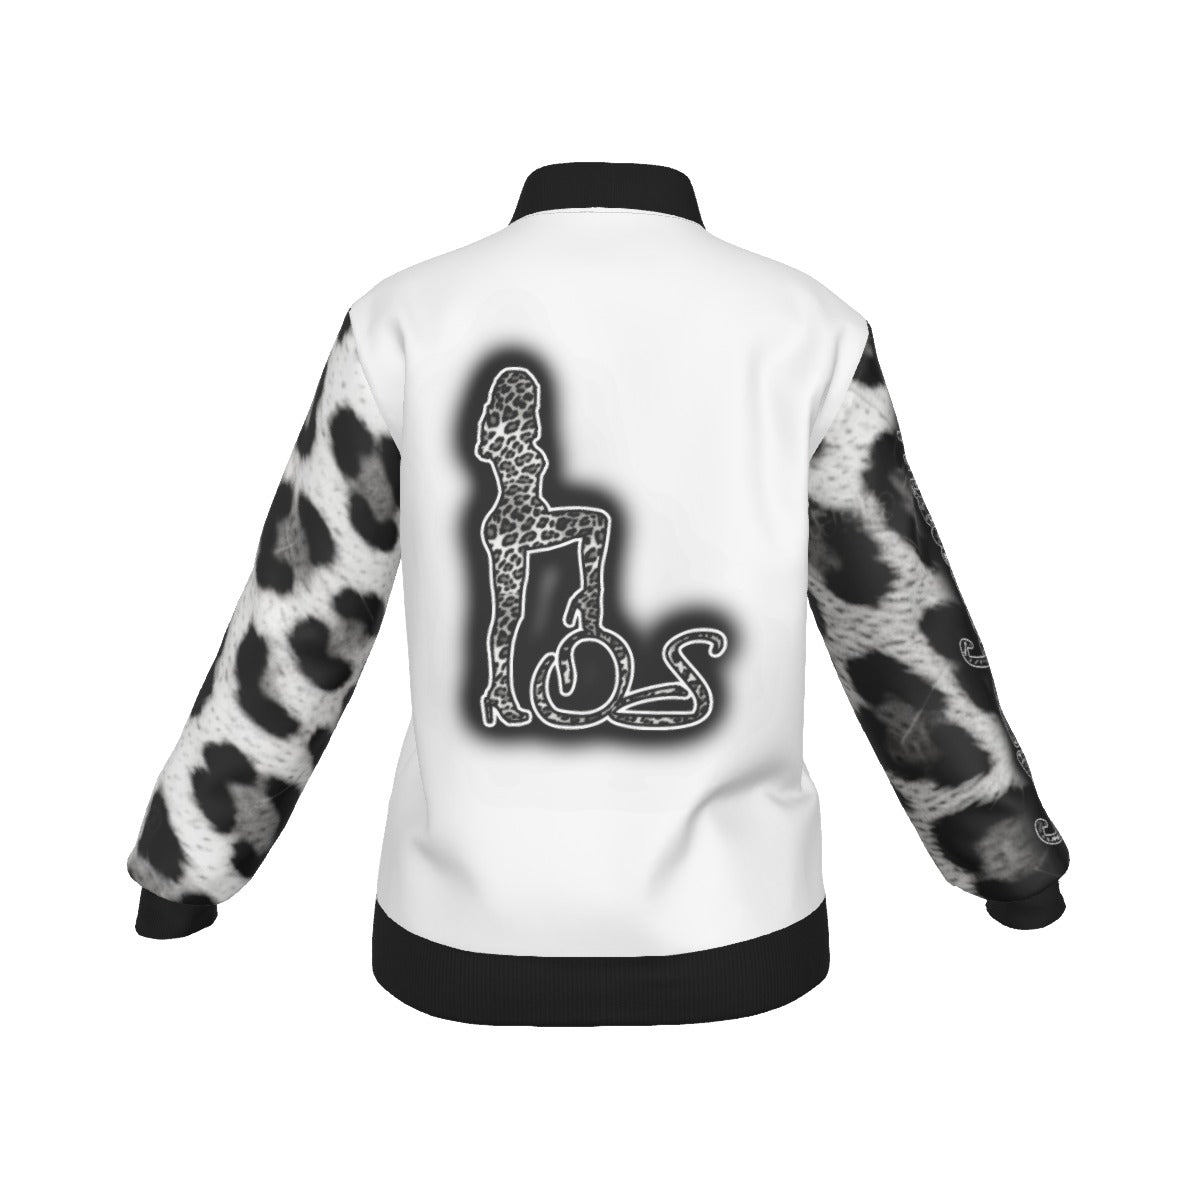 Officially Sexy Snow Leopard Collection Women's White Jacket Large Print Logo On Back (English) 2 3